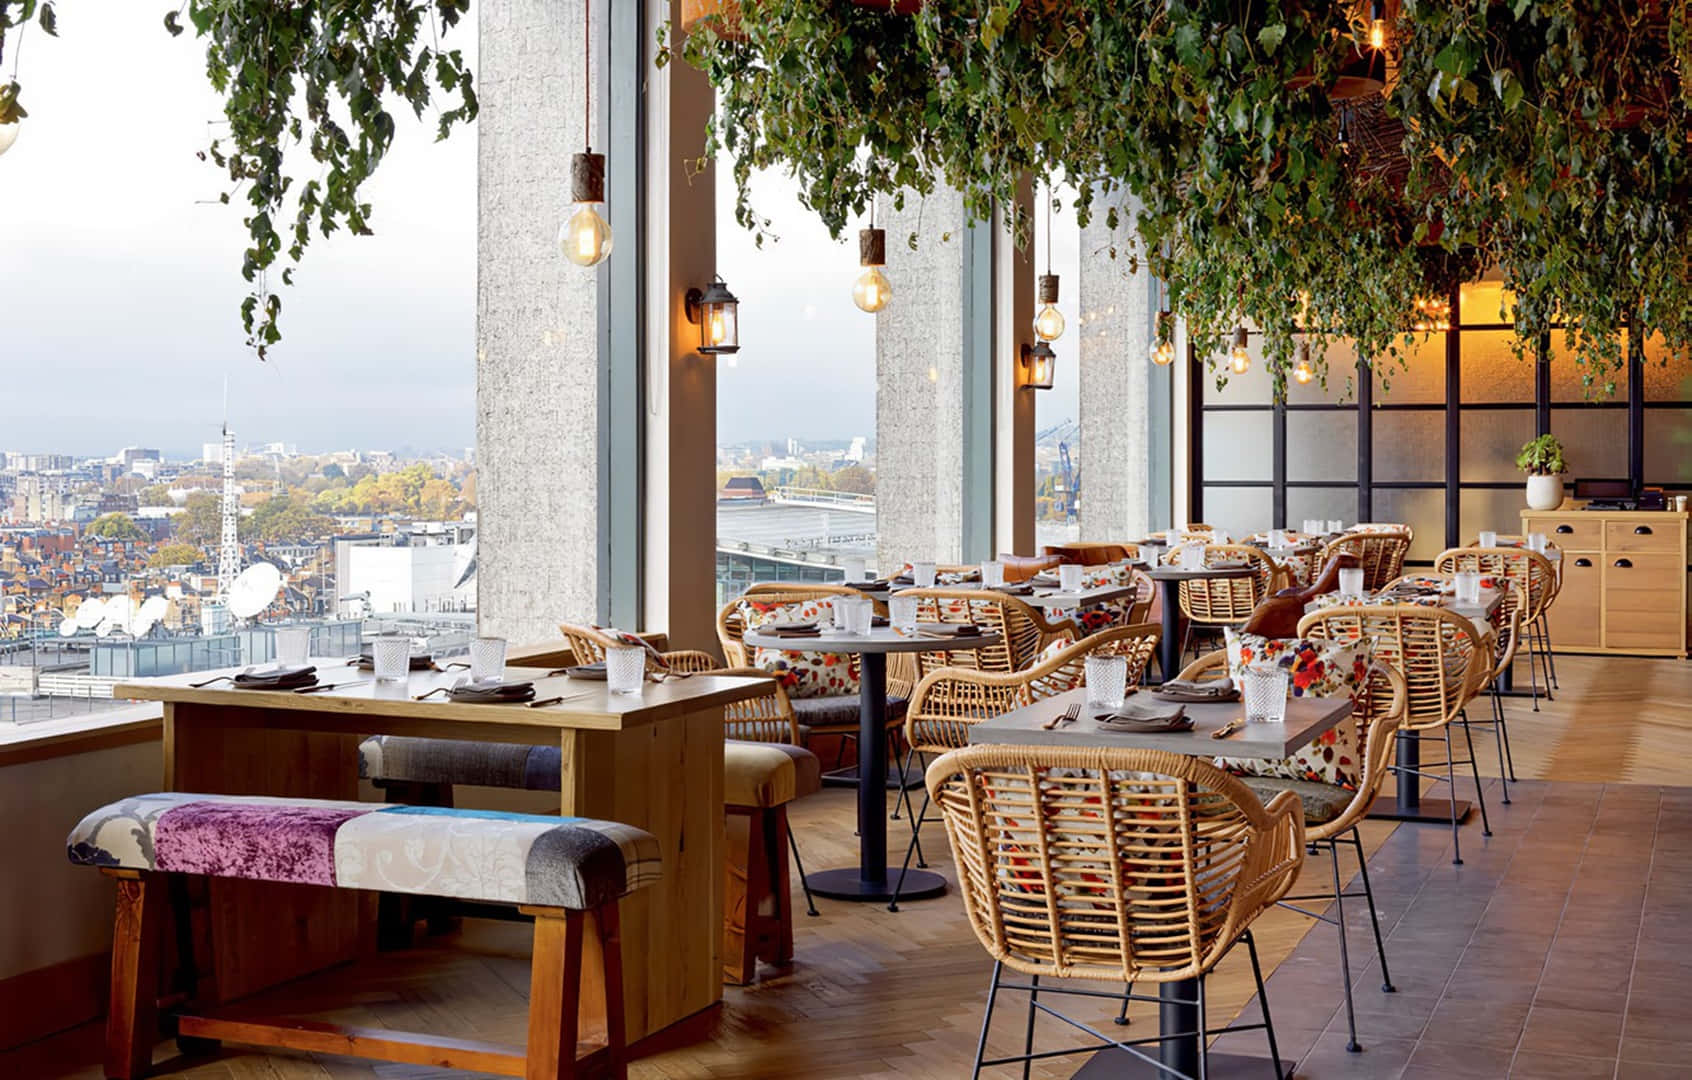 A Restaurant With A View Of The City